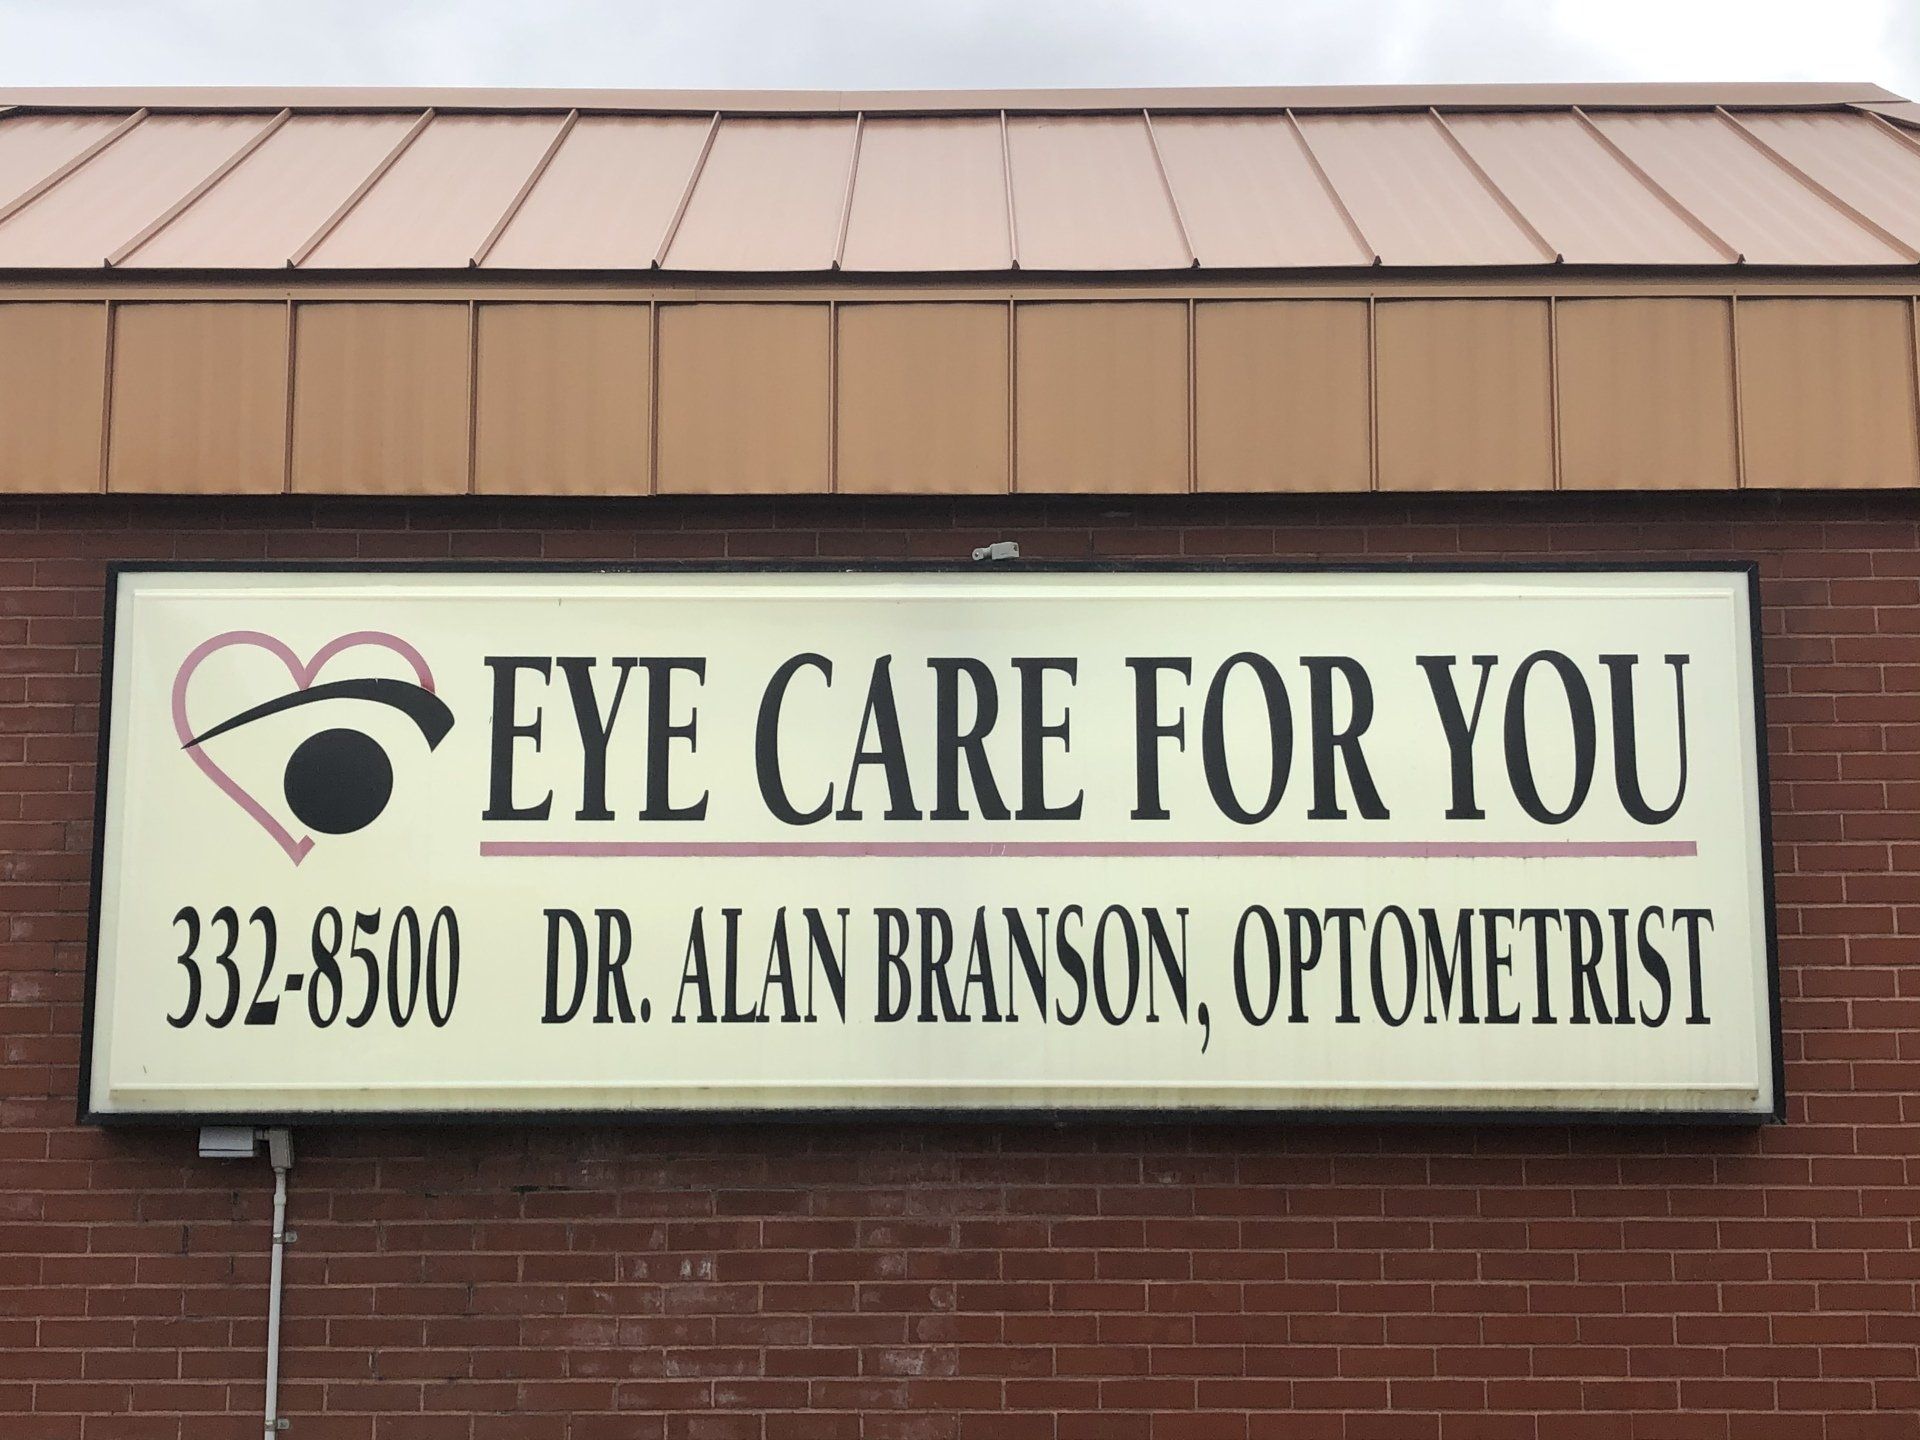 Eye care for you signage — Cape Girardeau, MO — Eye Care For You